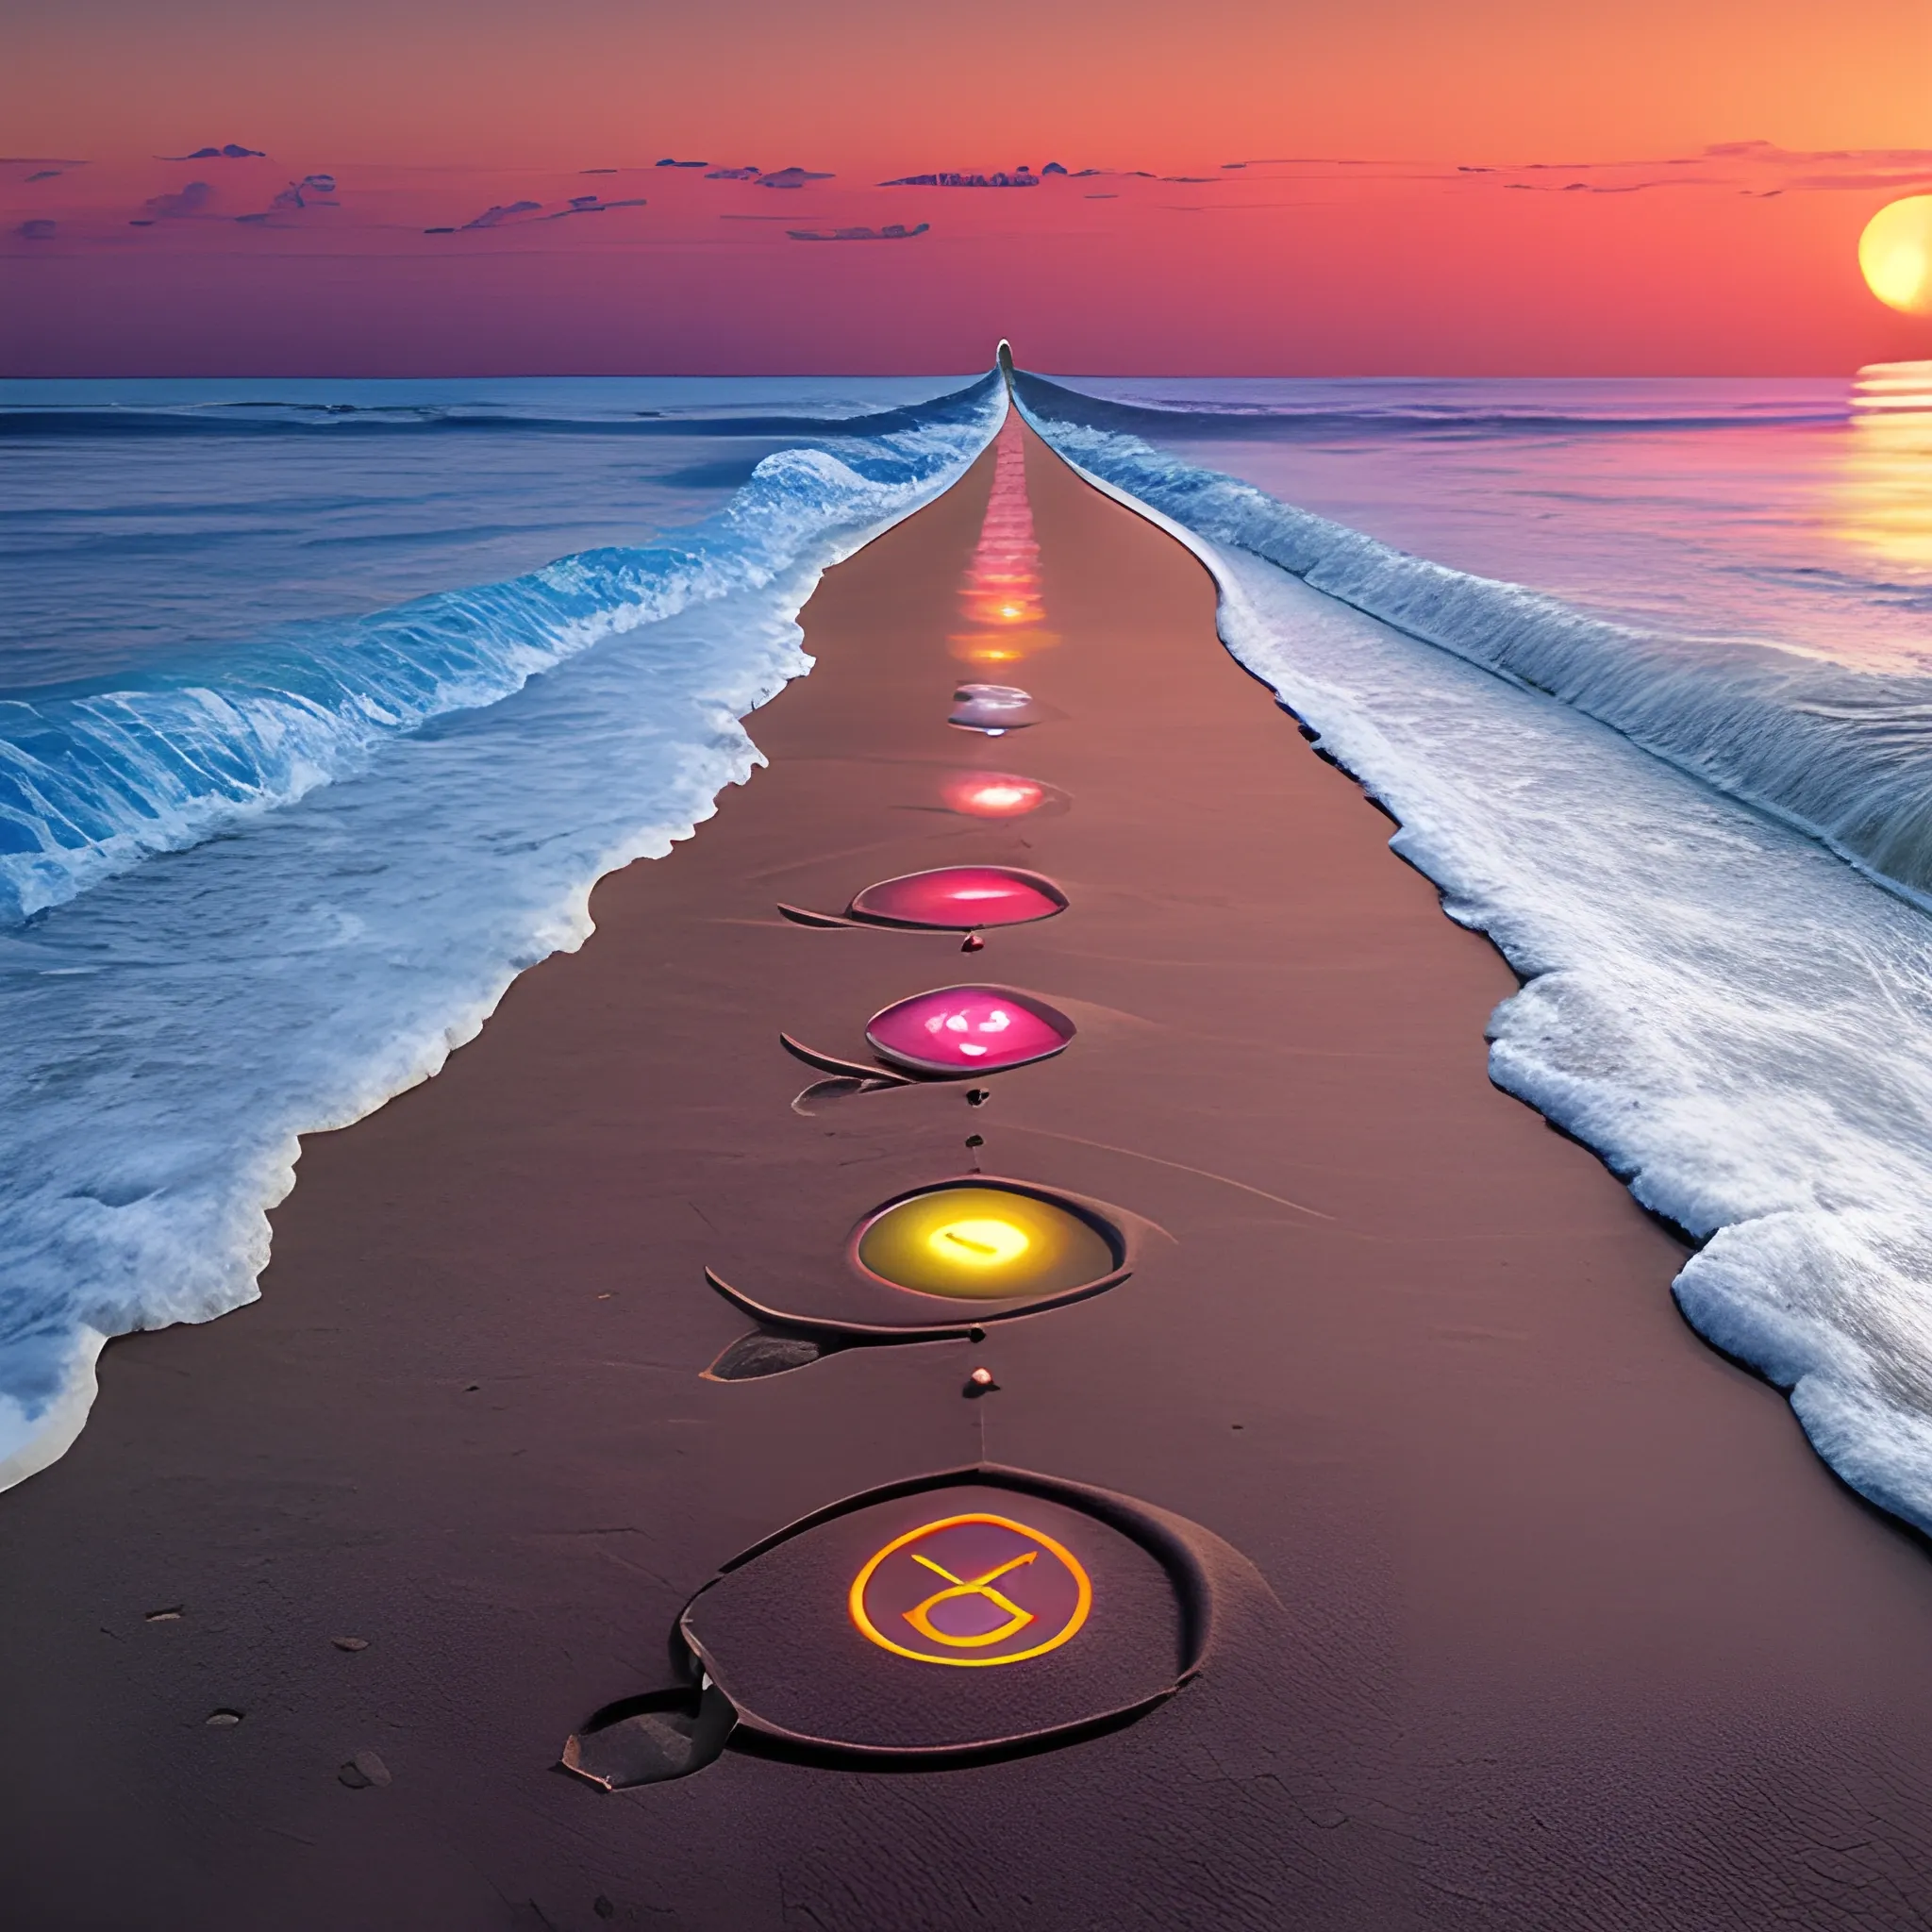 human road to the sea,, seven chakras, beach, sunset, universe, moon, road, realistic, footprints on the back